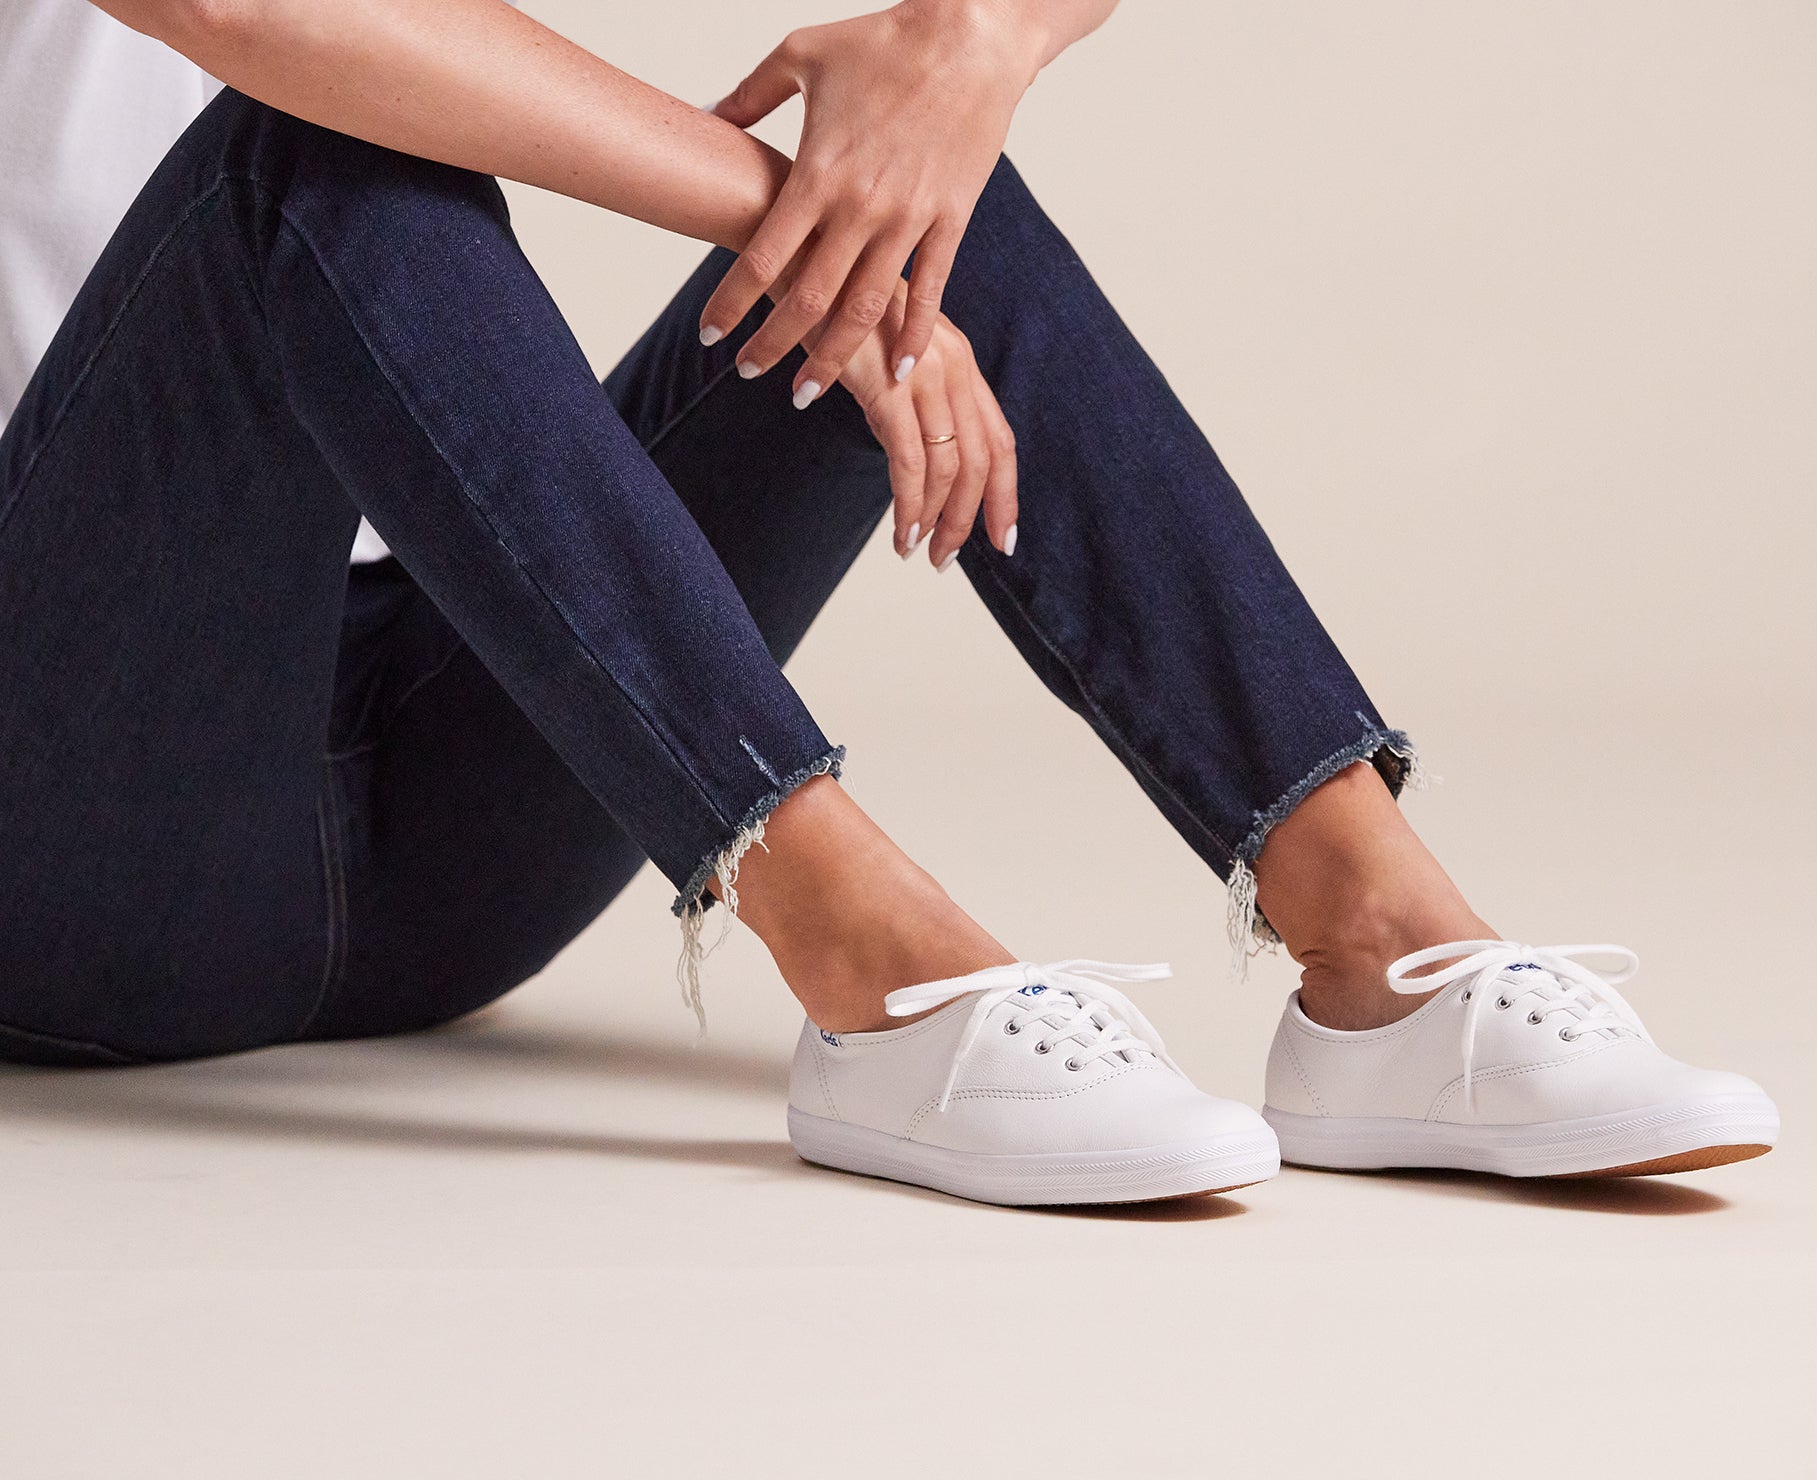 Keds Breezie Sneakers White Canvas Sneakers Flatform, 43% OFF